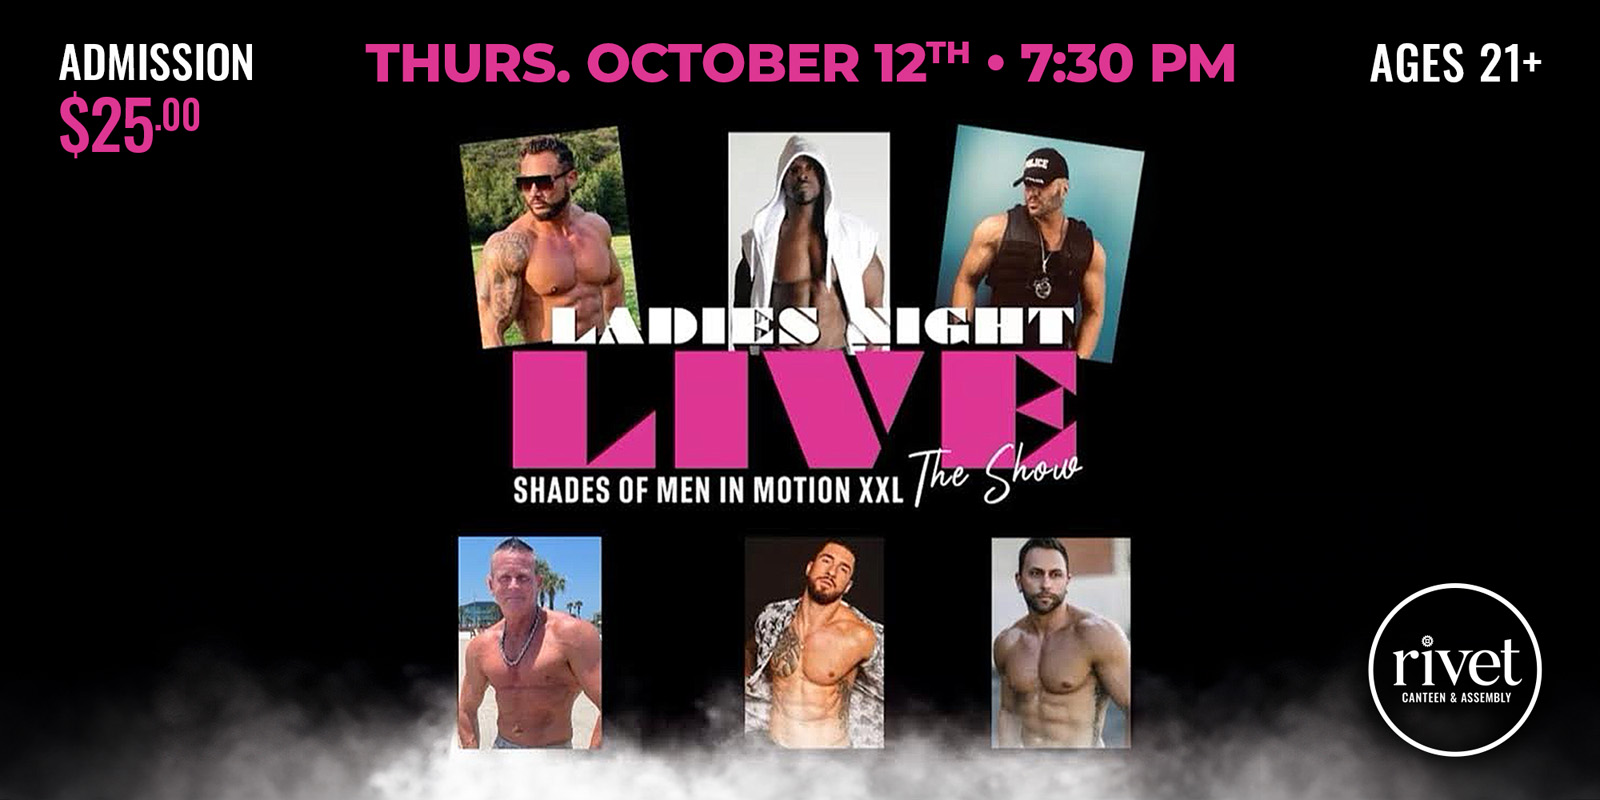 Ladies Night LIVE: Shades of Men In Motion XXL in Pottstown at Rivet: Canteen & Assembly on Thursday, October 12th, 2023. Doors: 6:30 PM. Show: 7:30 PM to 9:30 PM. This event is 21+ ONLY!